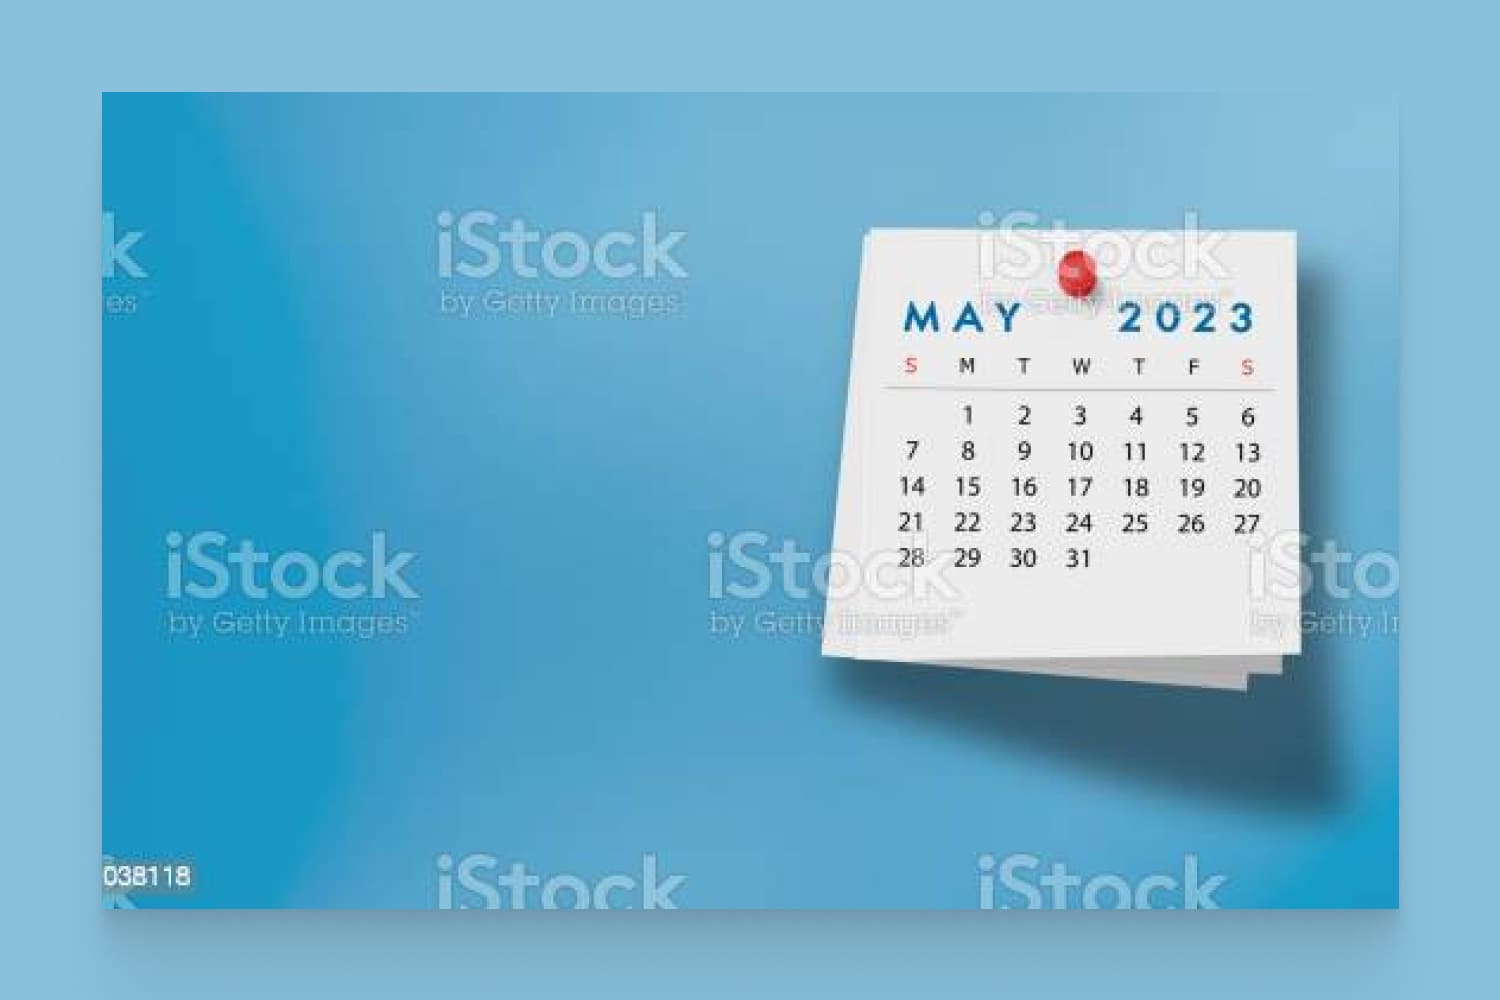 2023 May Calendar on Note Pad Against Blue Background stock photo.